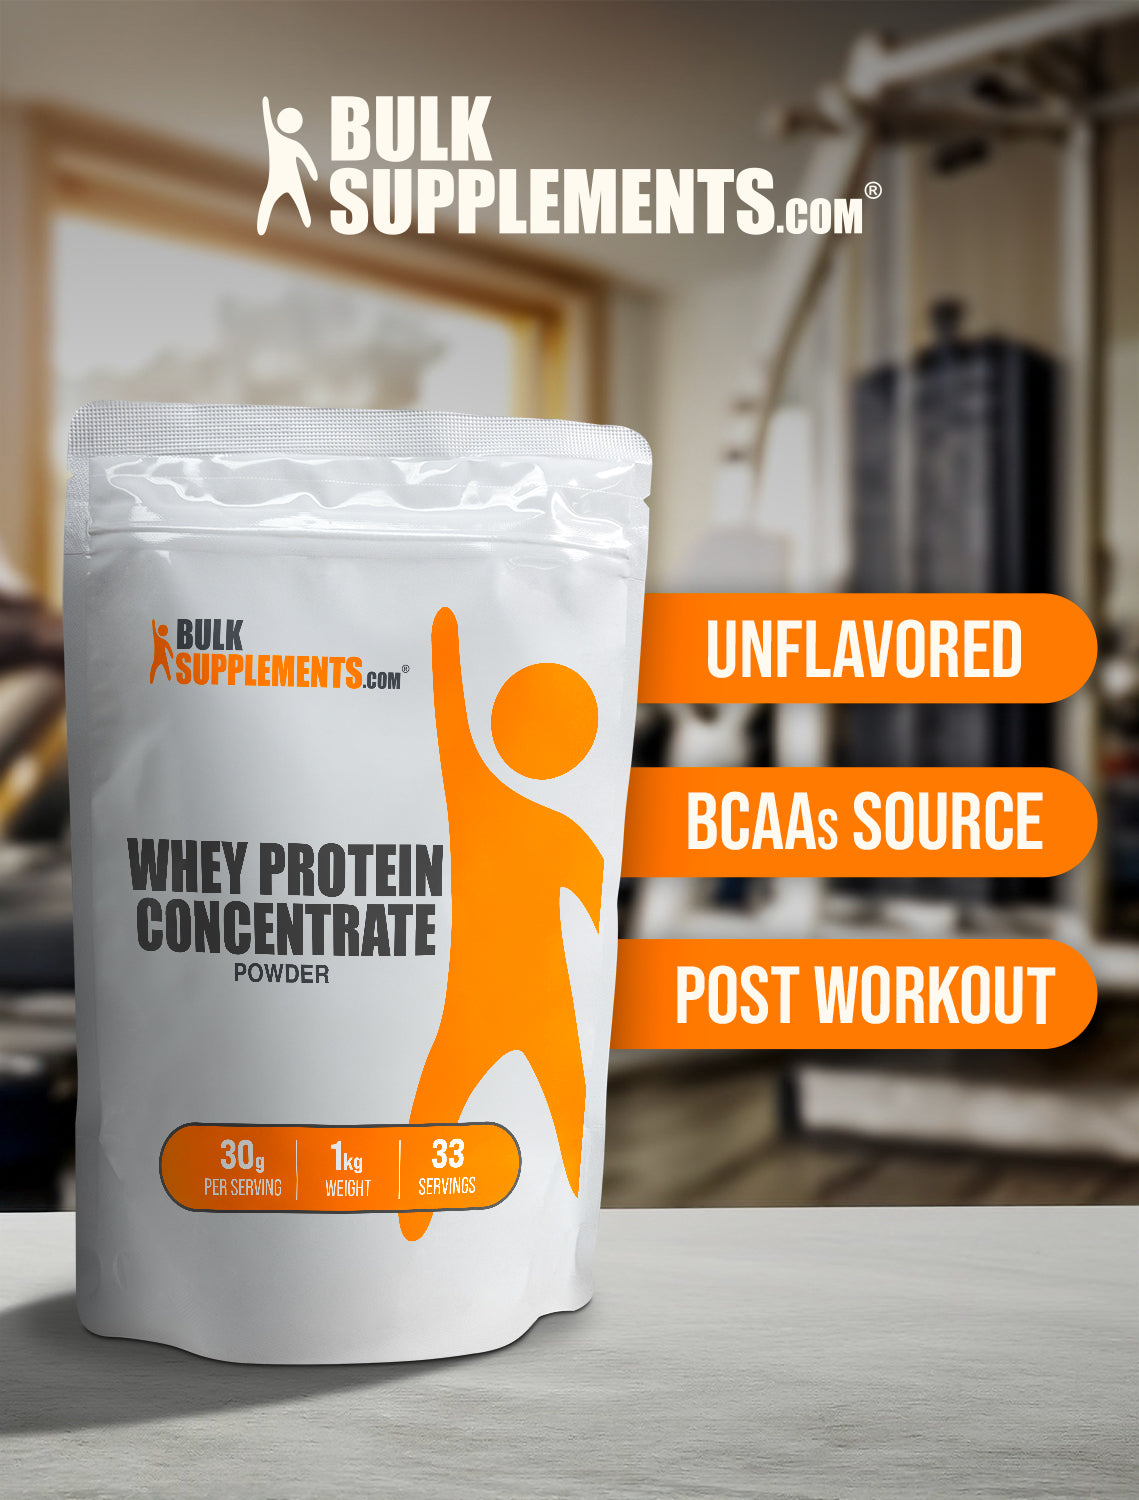 Whey protein concentrate powder 1kg keywords image